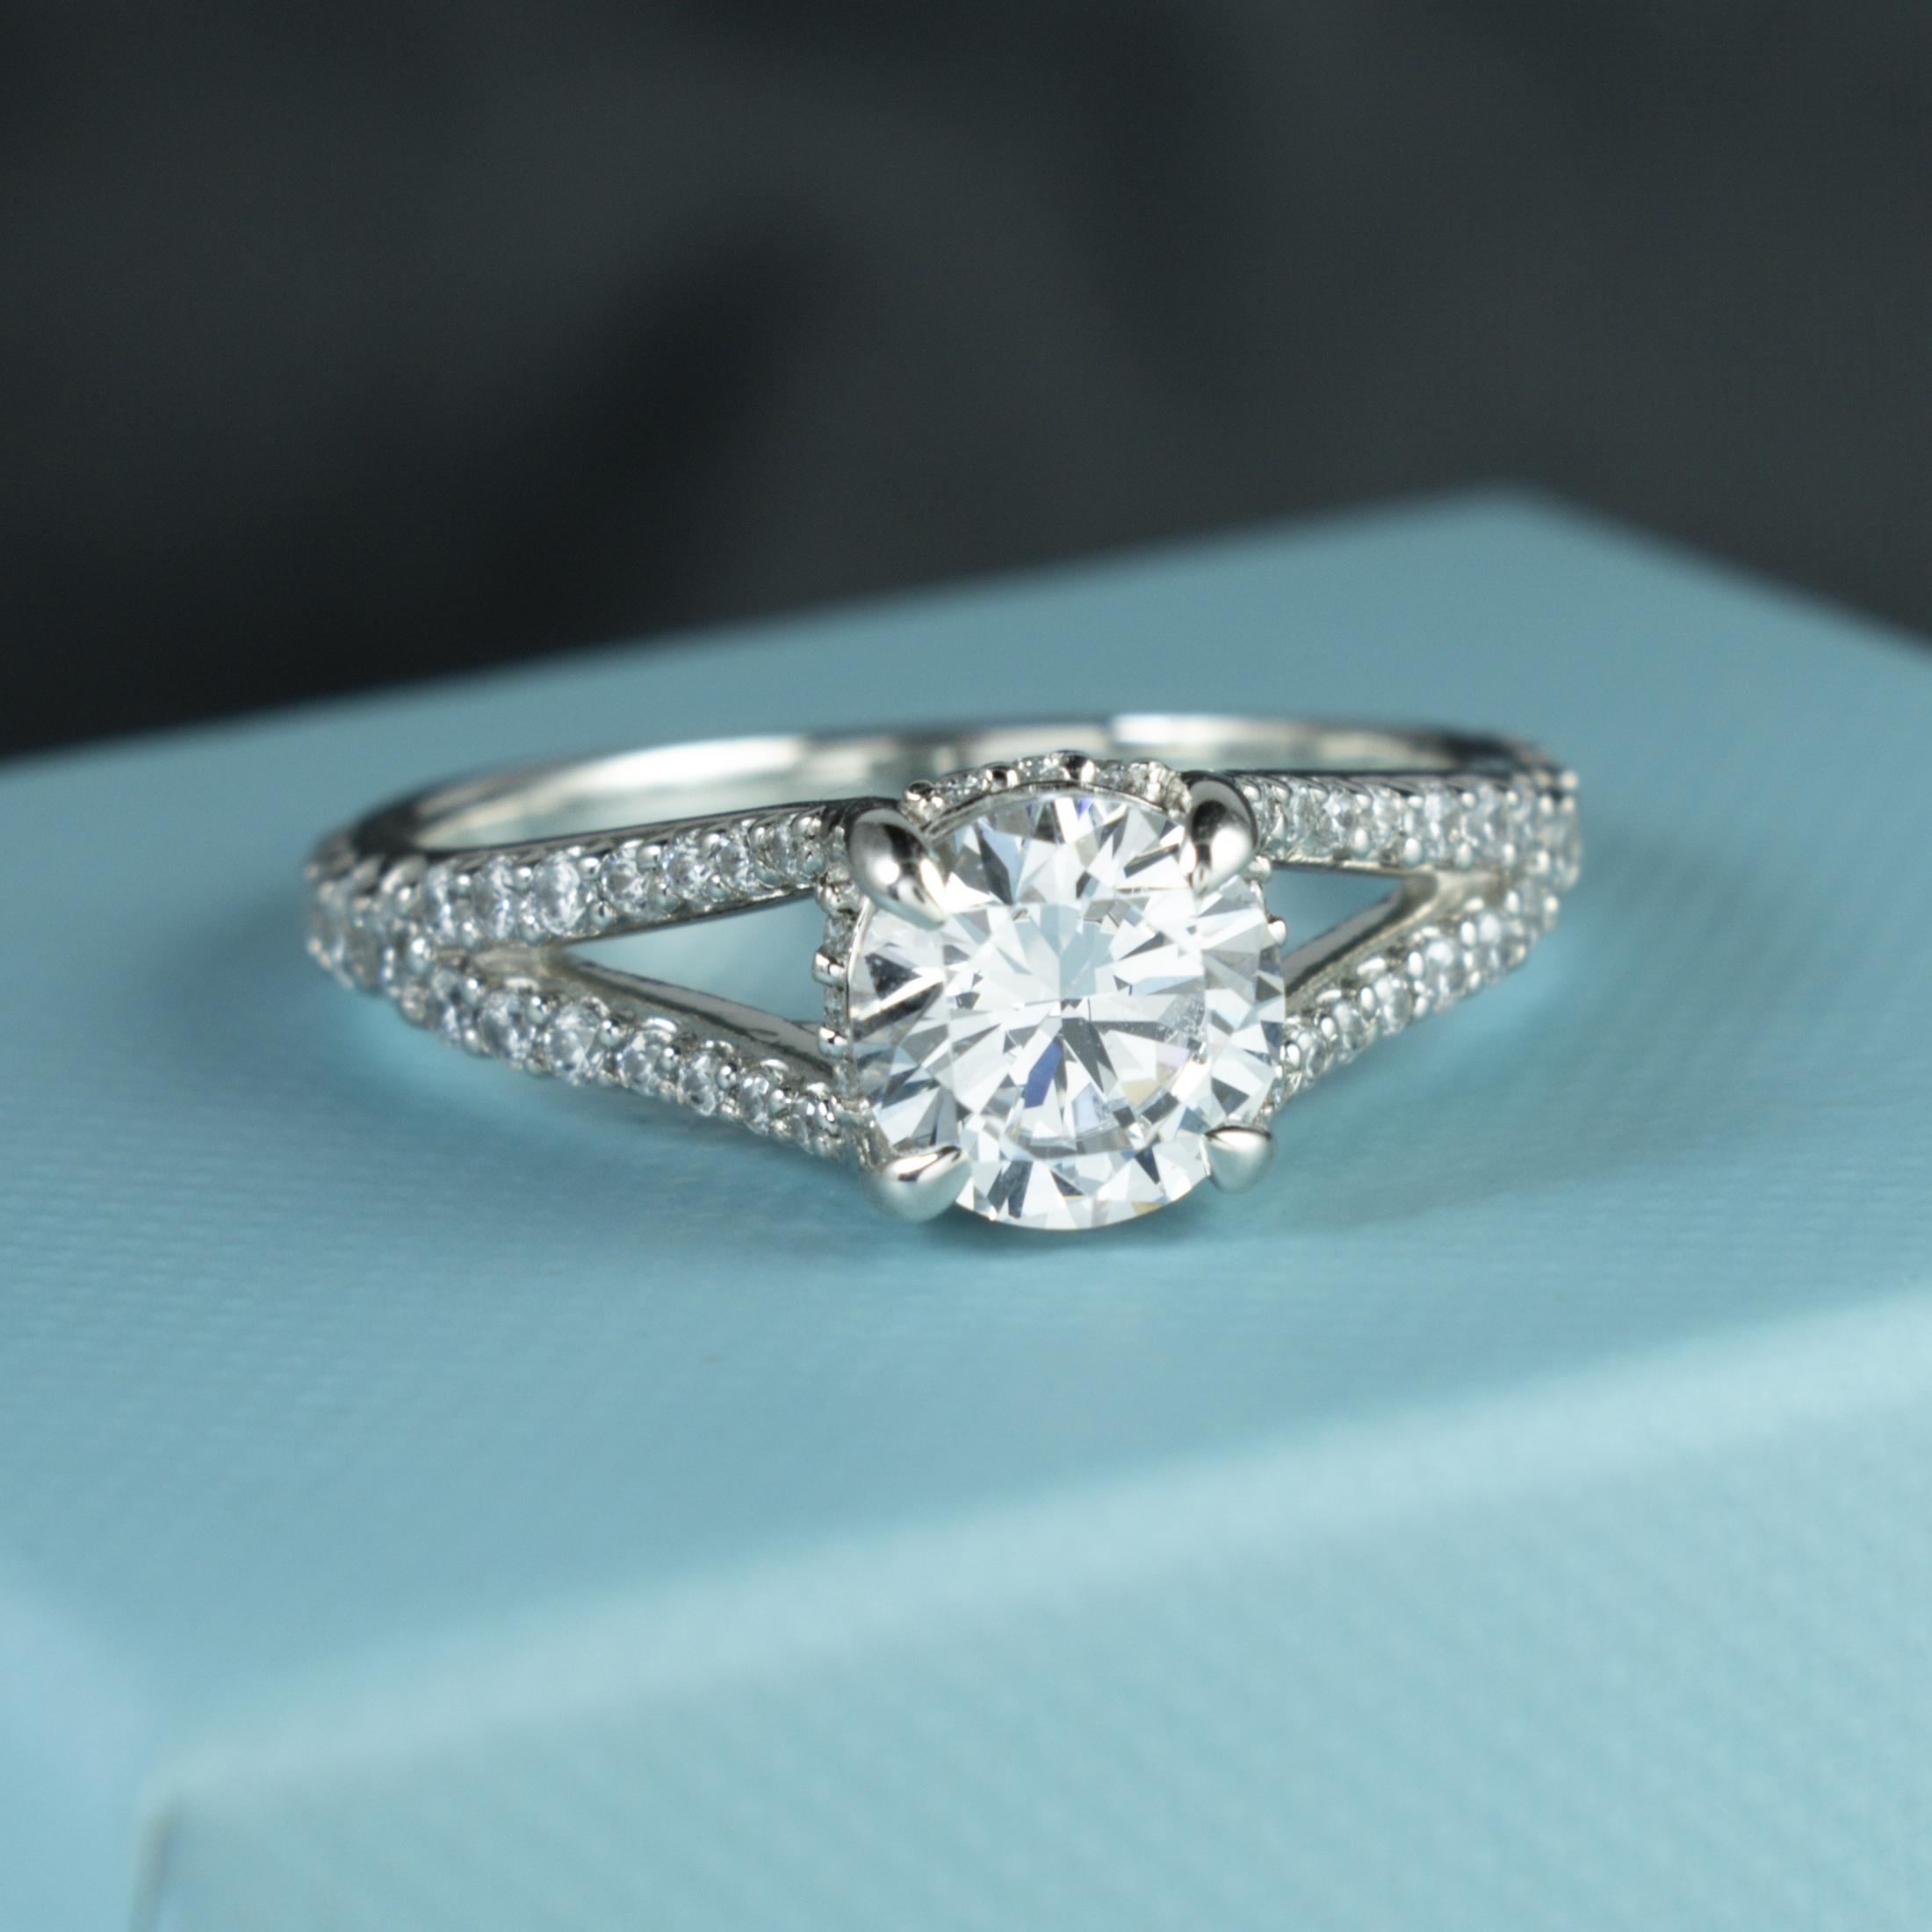 VRAI Created Diamonds: Made-to-Order Engagement Rings & Jewelry